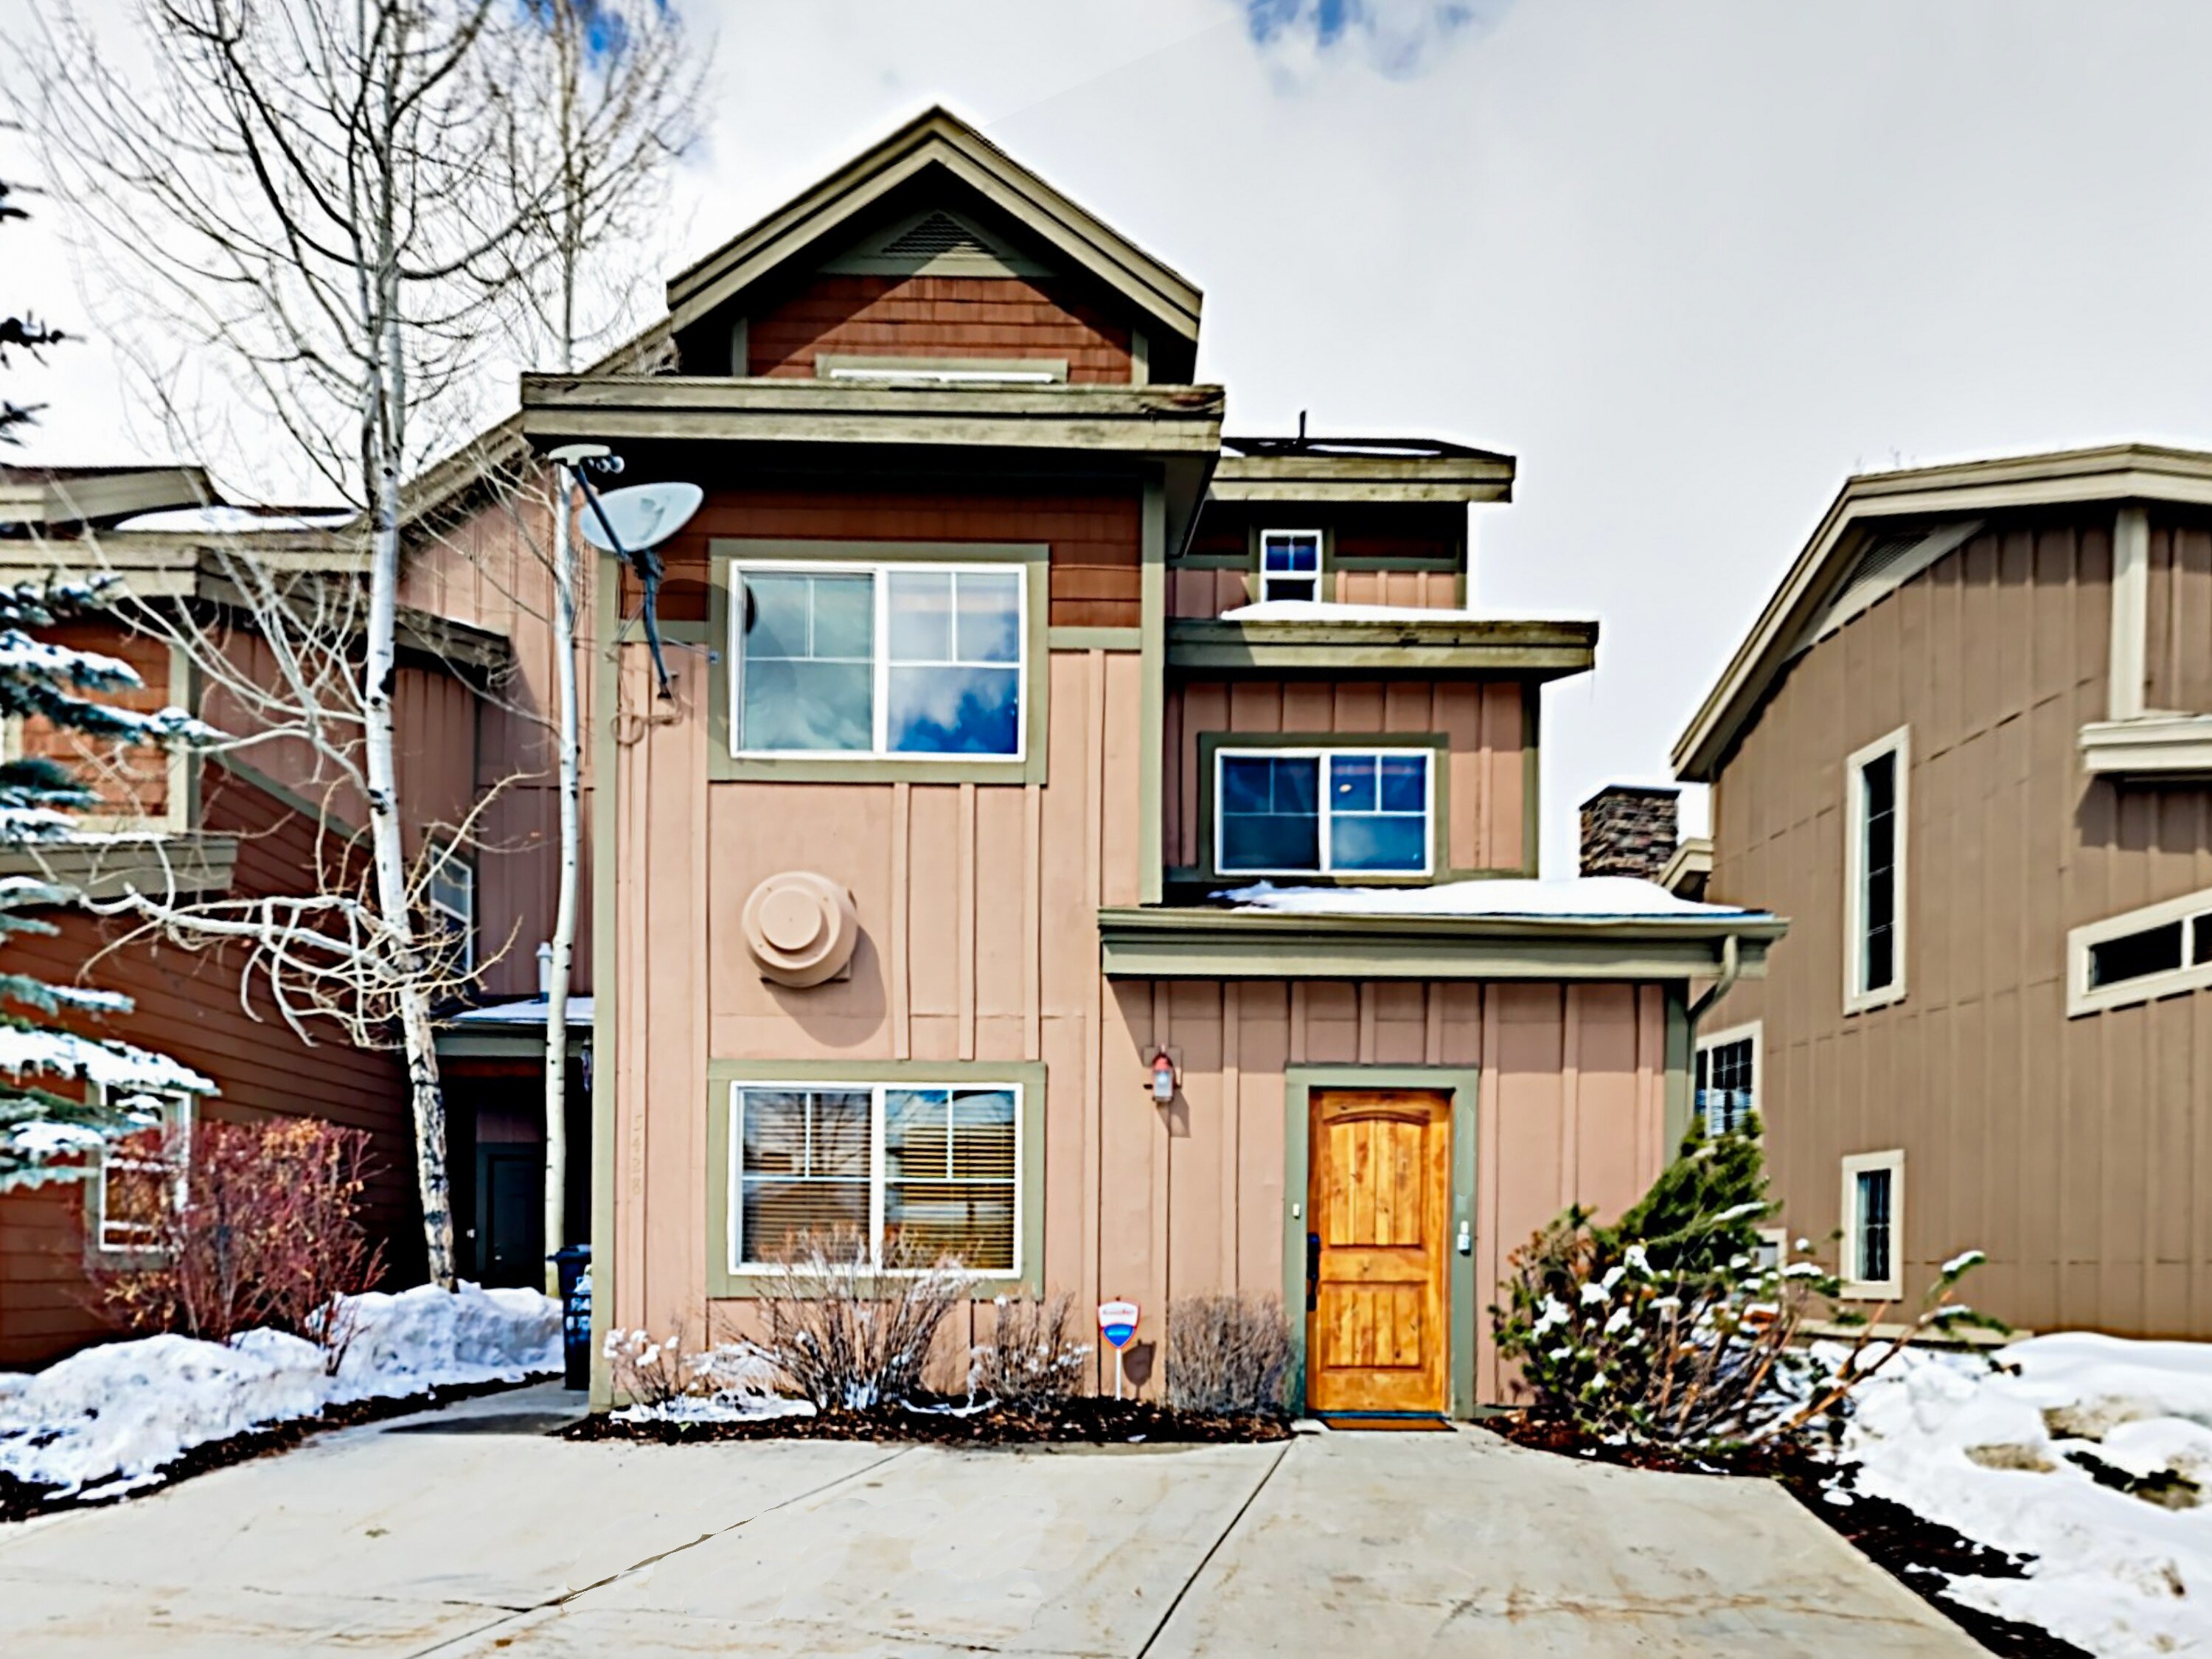 Welcome to Park City! This townhouse is professionally managed by TurnKey Vacation Rentals.